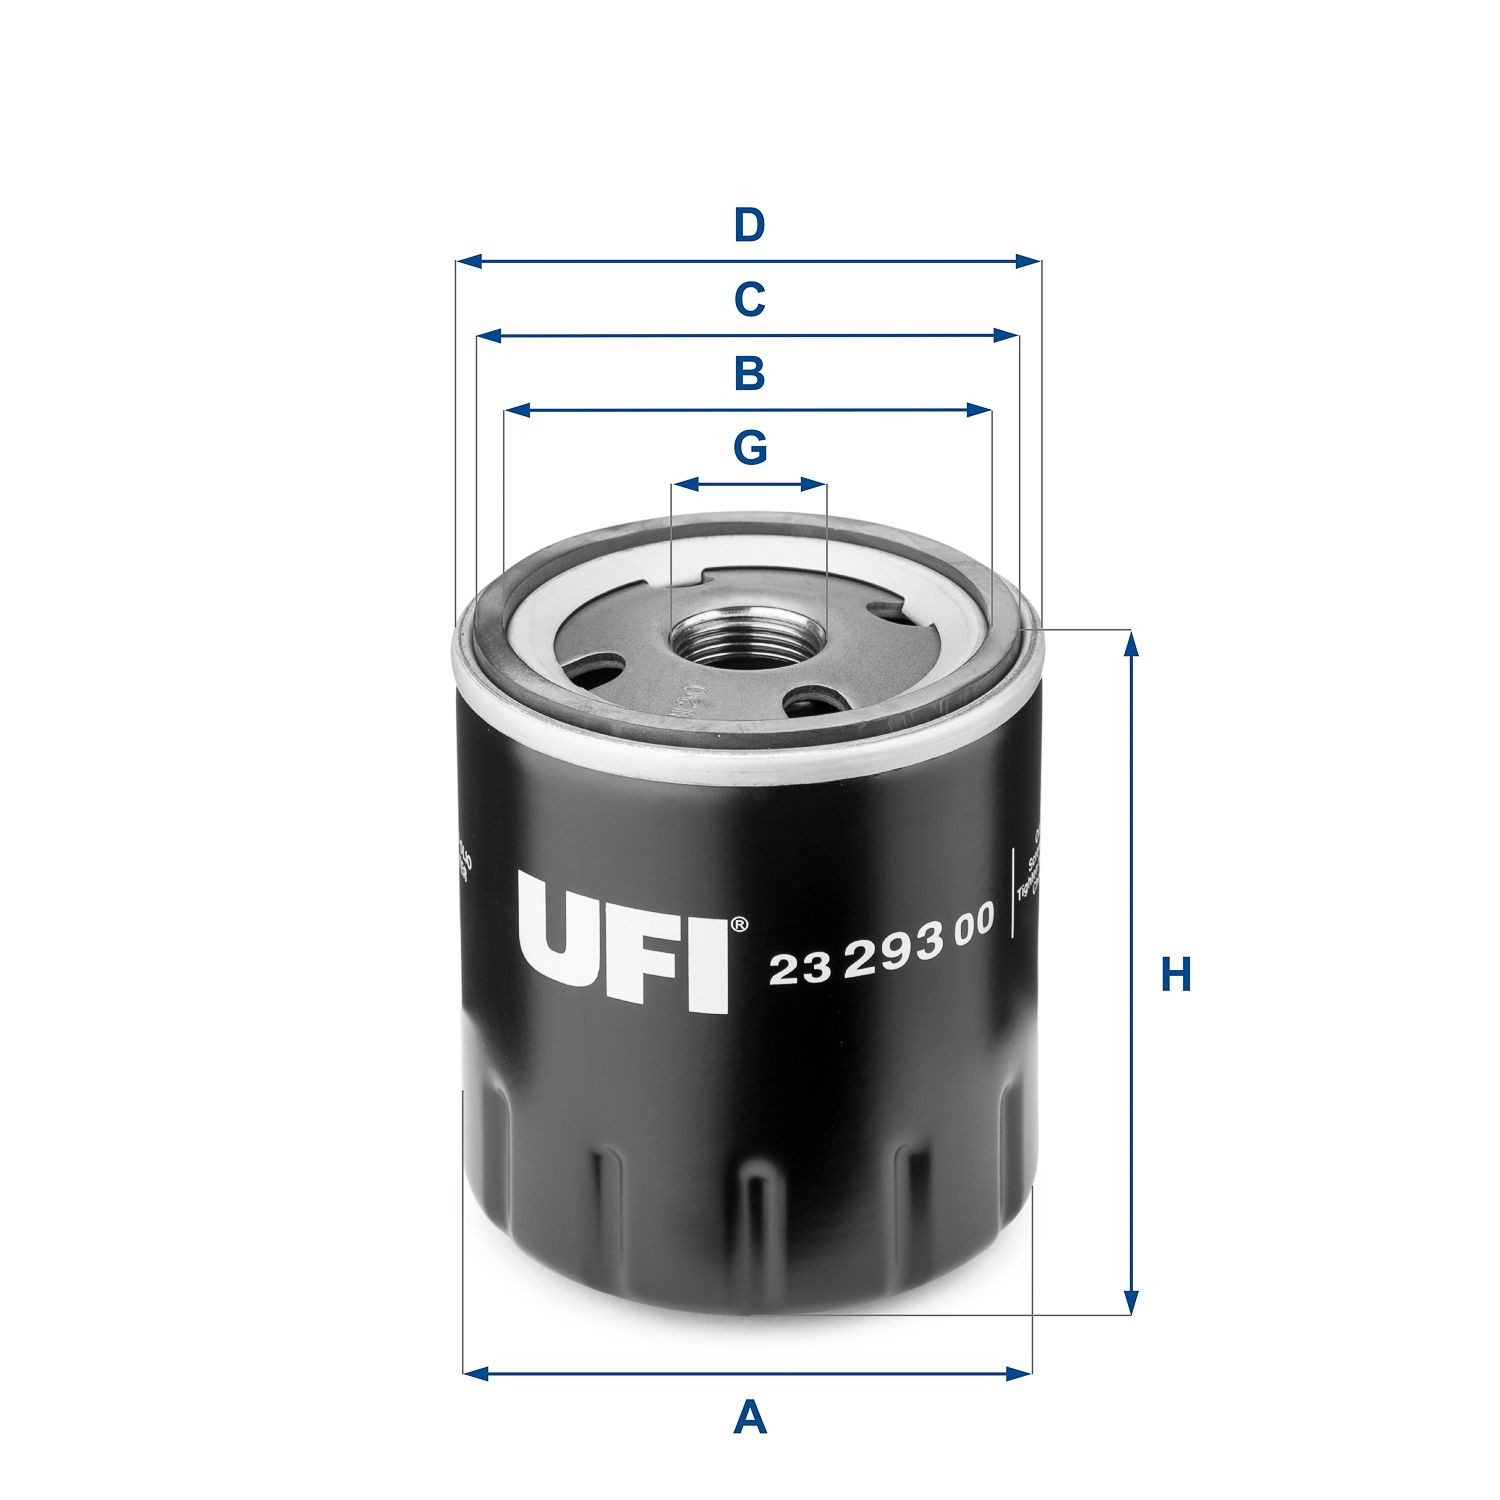 23.293.00 Oil filter 23.293.00 UFI M 20 X 1,5, with one anti-return valve, Spin-on Filter